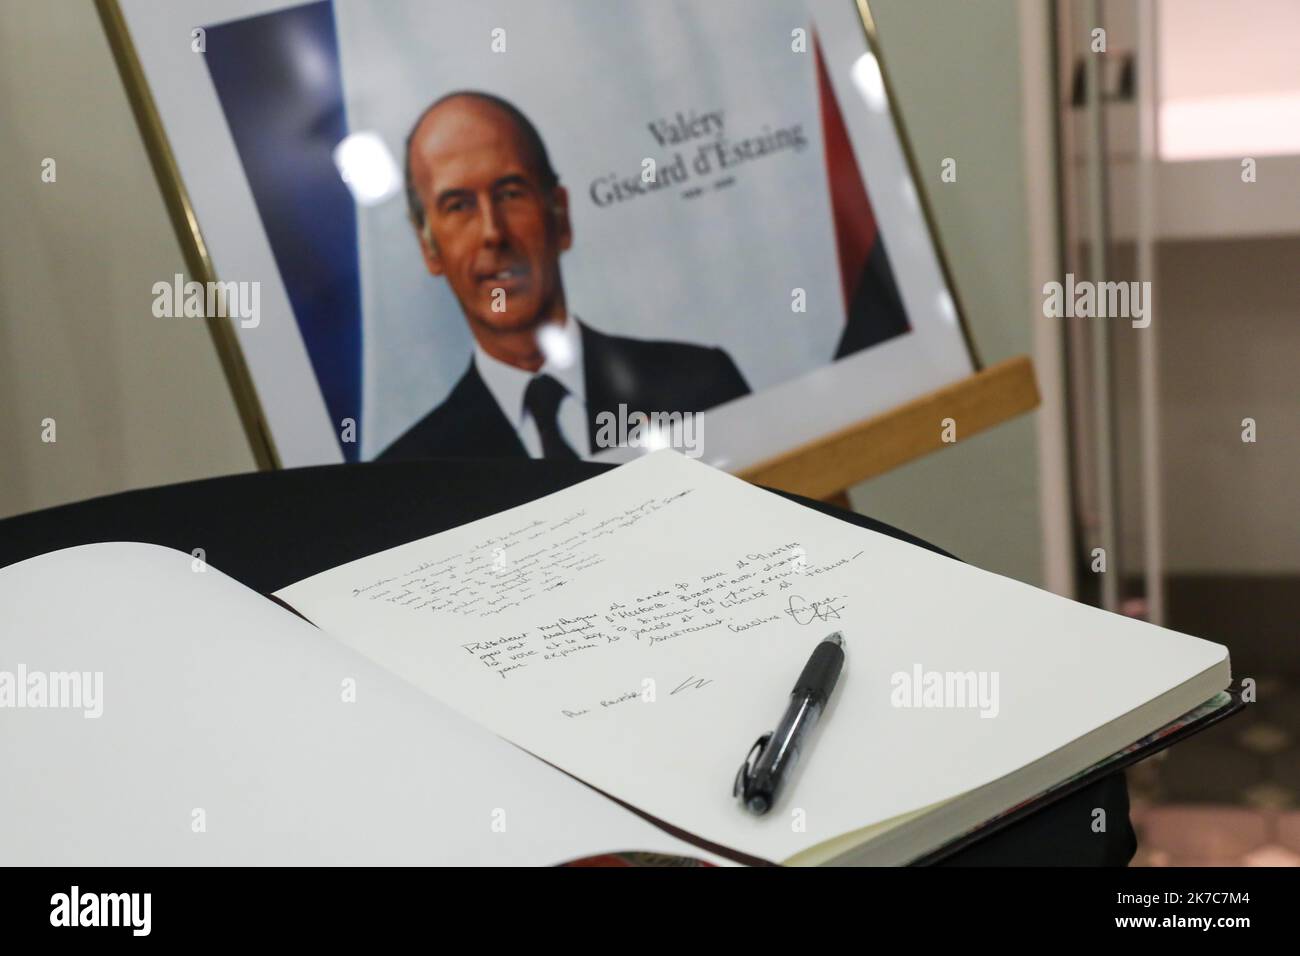 ©PHOTOPQR/VOIX DU NORD/Thierry THOREL ; 09/12/2020 ; LIVRE D'OR - un livre d'or a ete mis en place au seinde la mairie , pour rendre hommage a Valery Giscard d'Estaing - Le 9 decembre 2020 - A Roubaix - France, dec 9th 2020 Musee d'Orsay : books of condolence for the late former president for this national day of mourning. No official ceremony and funeral in small county  Stock Photo